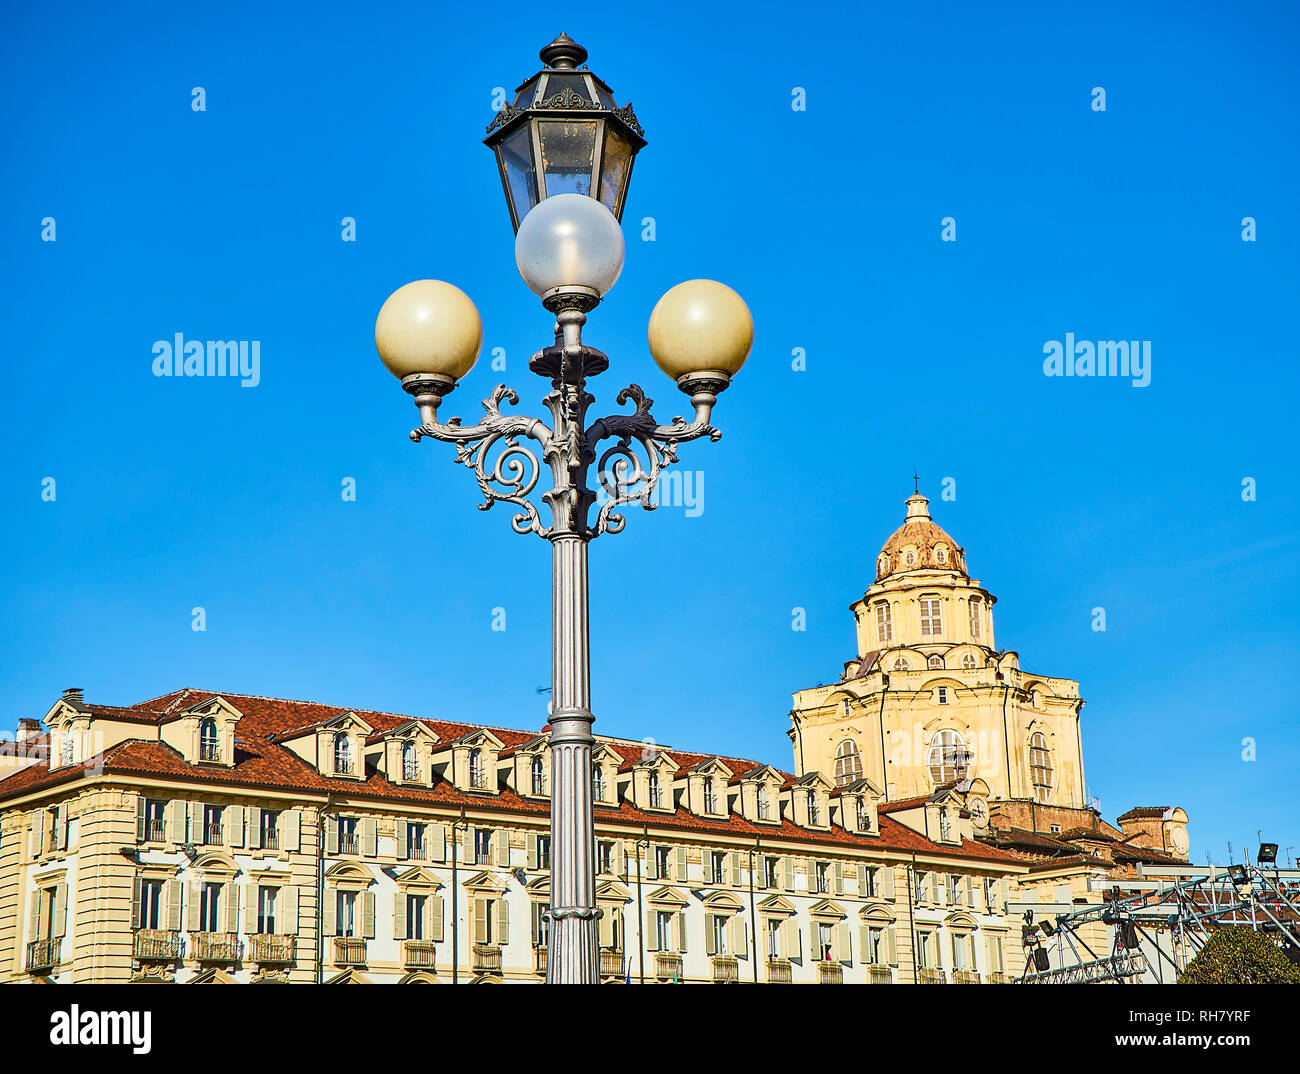 Dome of the Real Chiesa di San Lorenzo church. View from the Piazza Castello square. Turin, Piedmont, Italy. Stock Photo